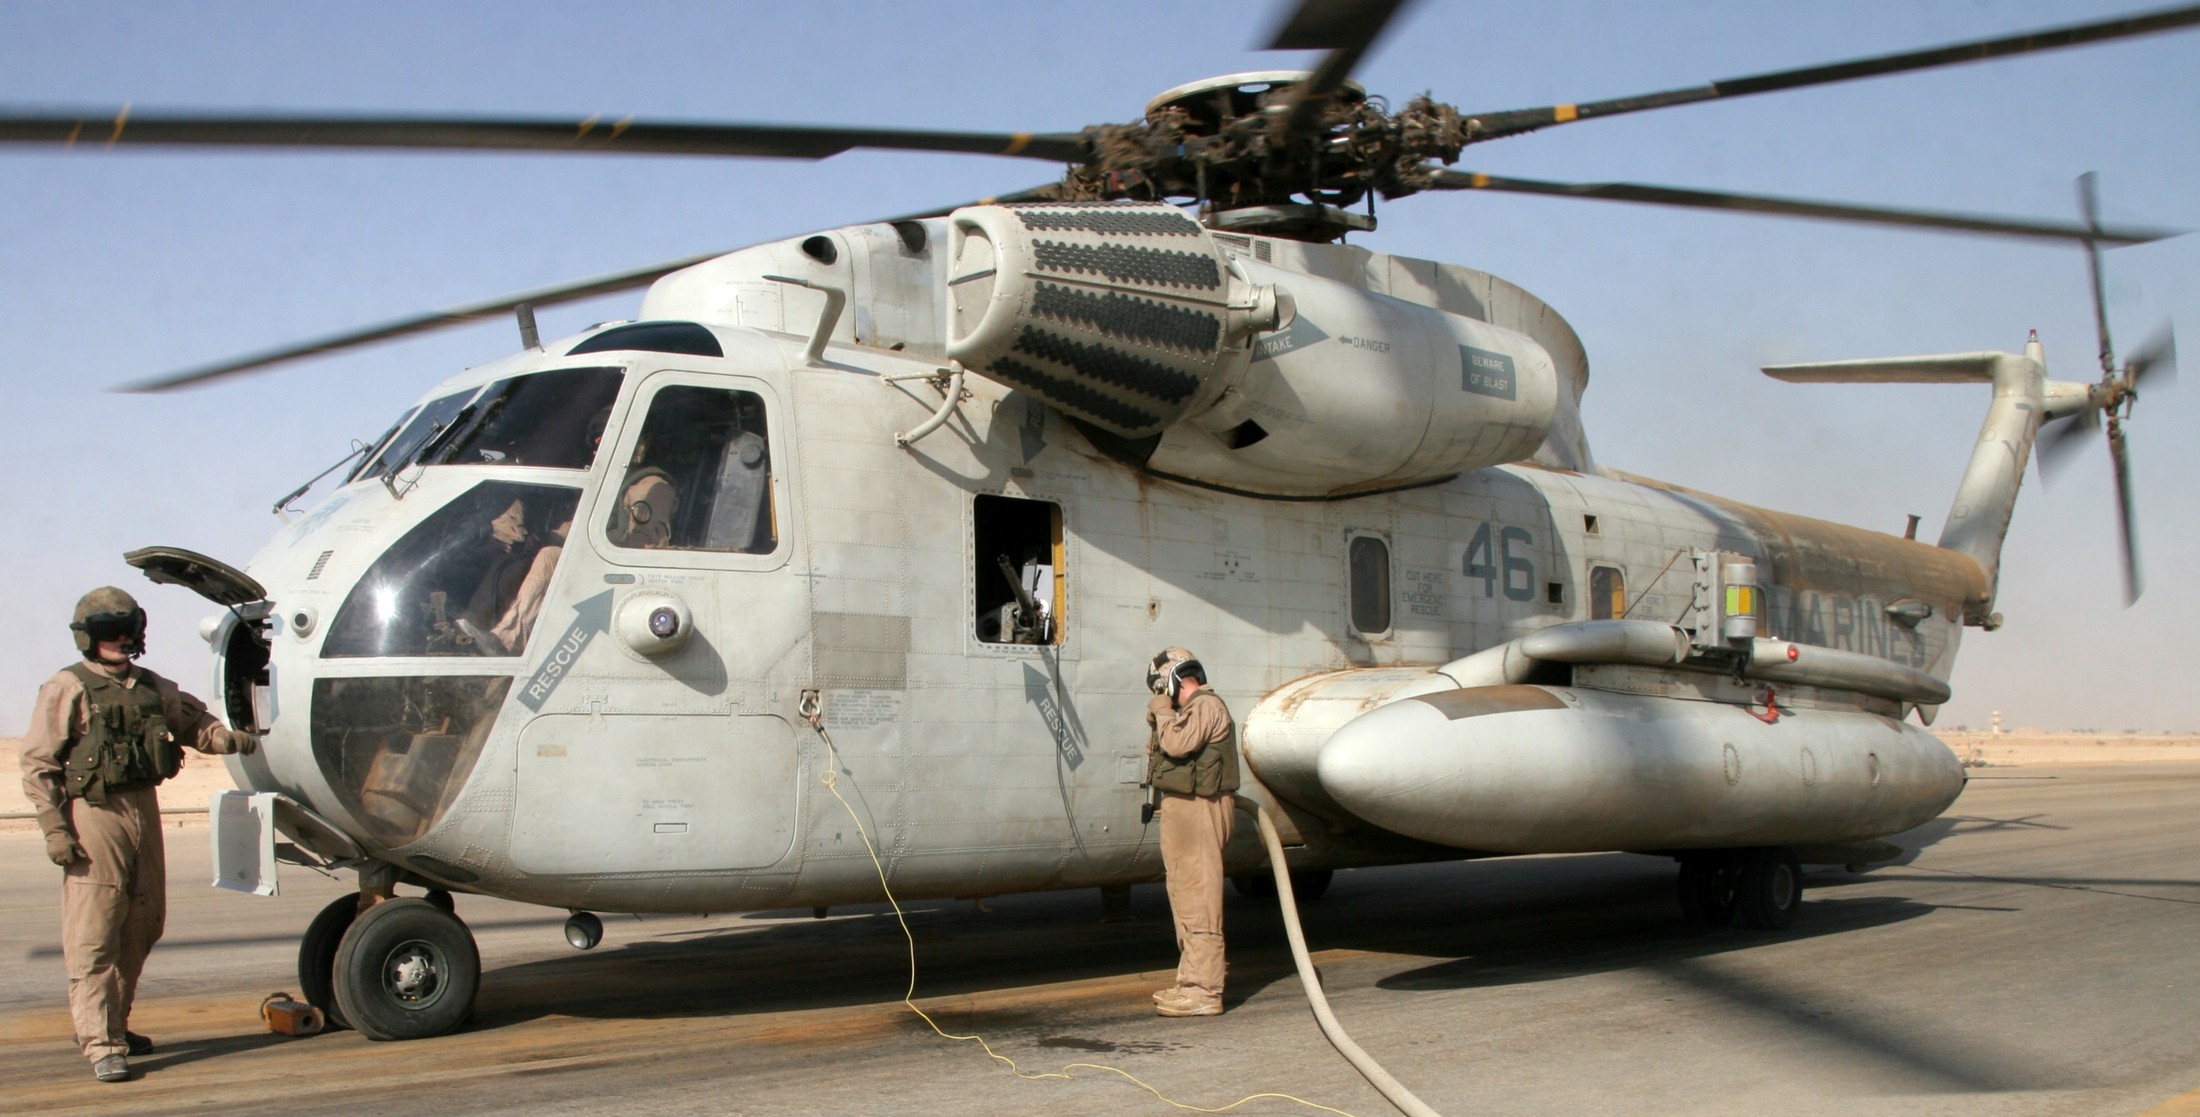 hmh-363 red lions marine heavy helicopter squadron usmc sikorsky ch-53d sea stallion 24 al asad air base iraq